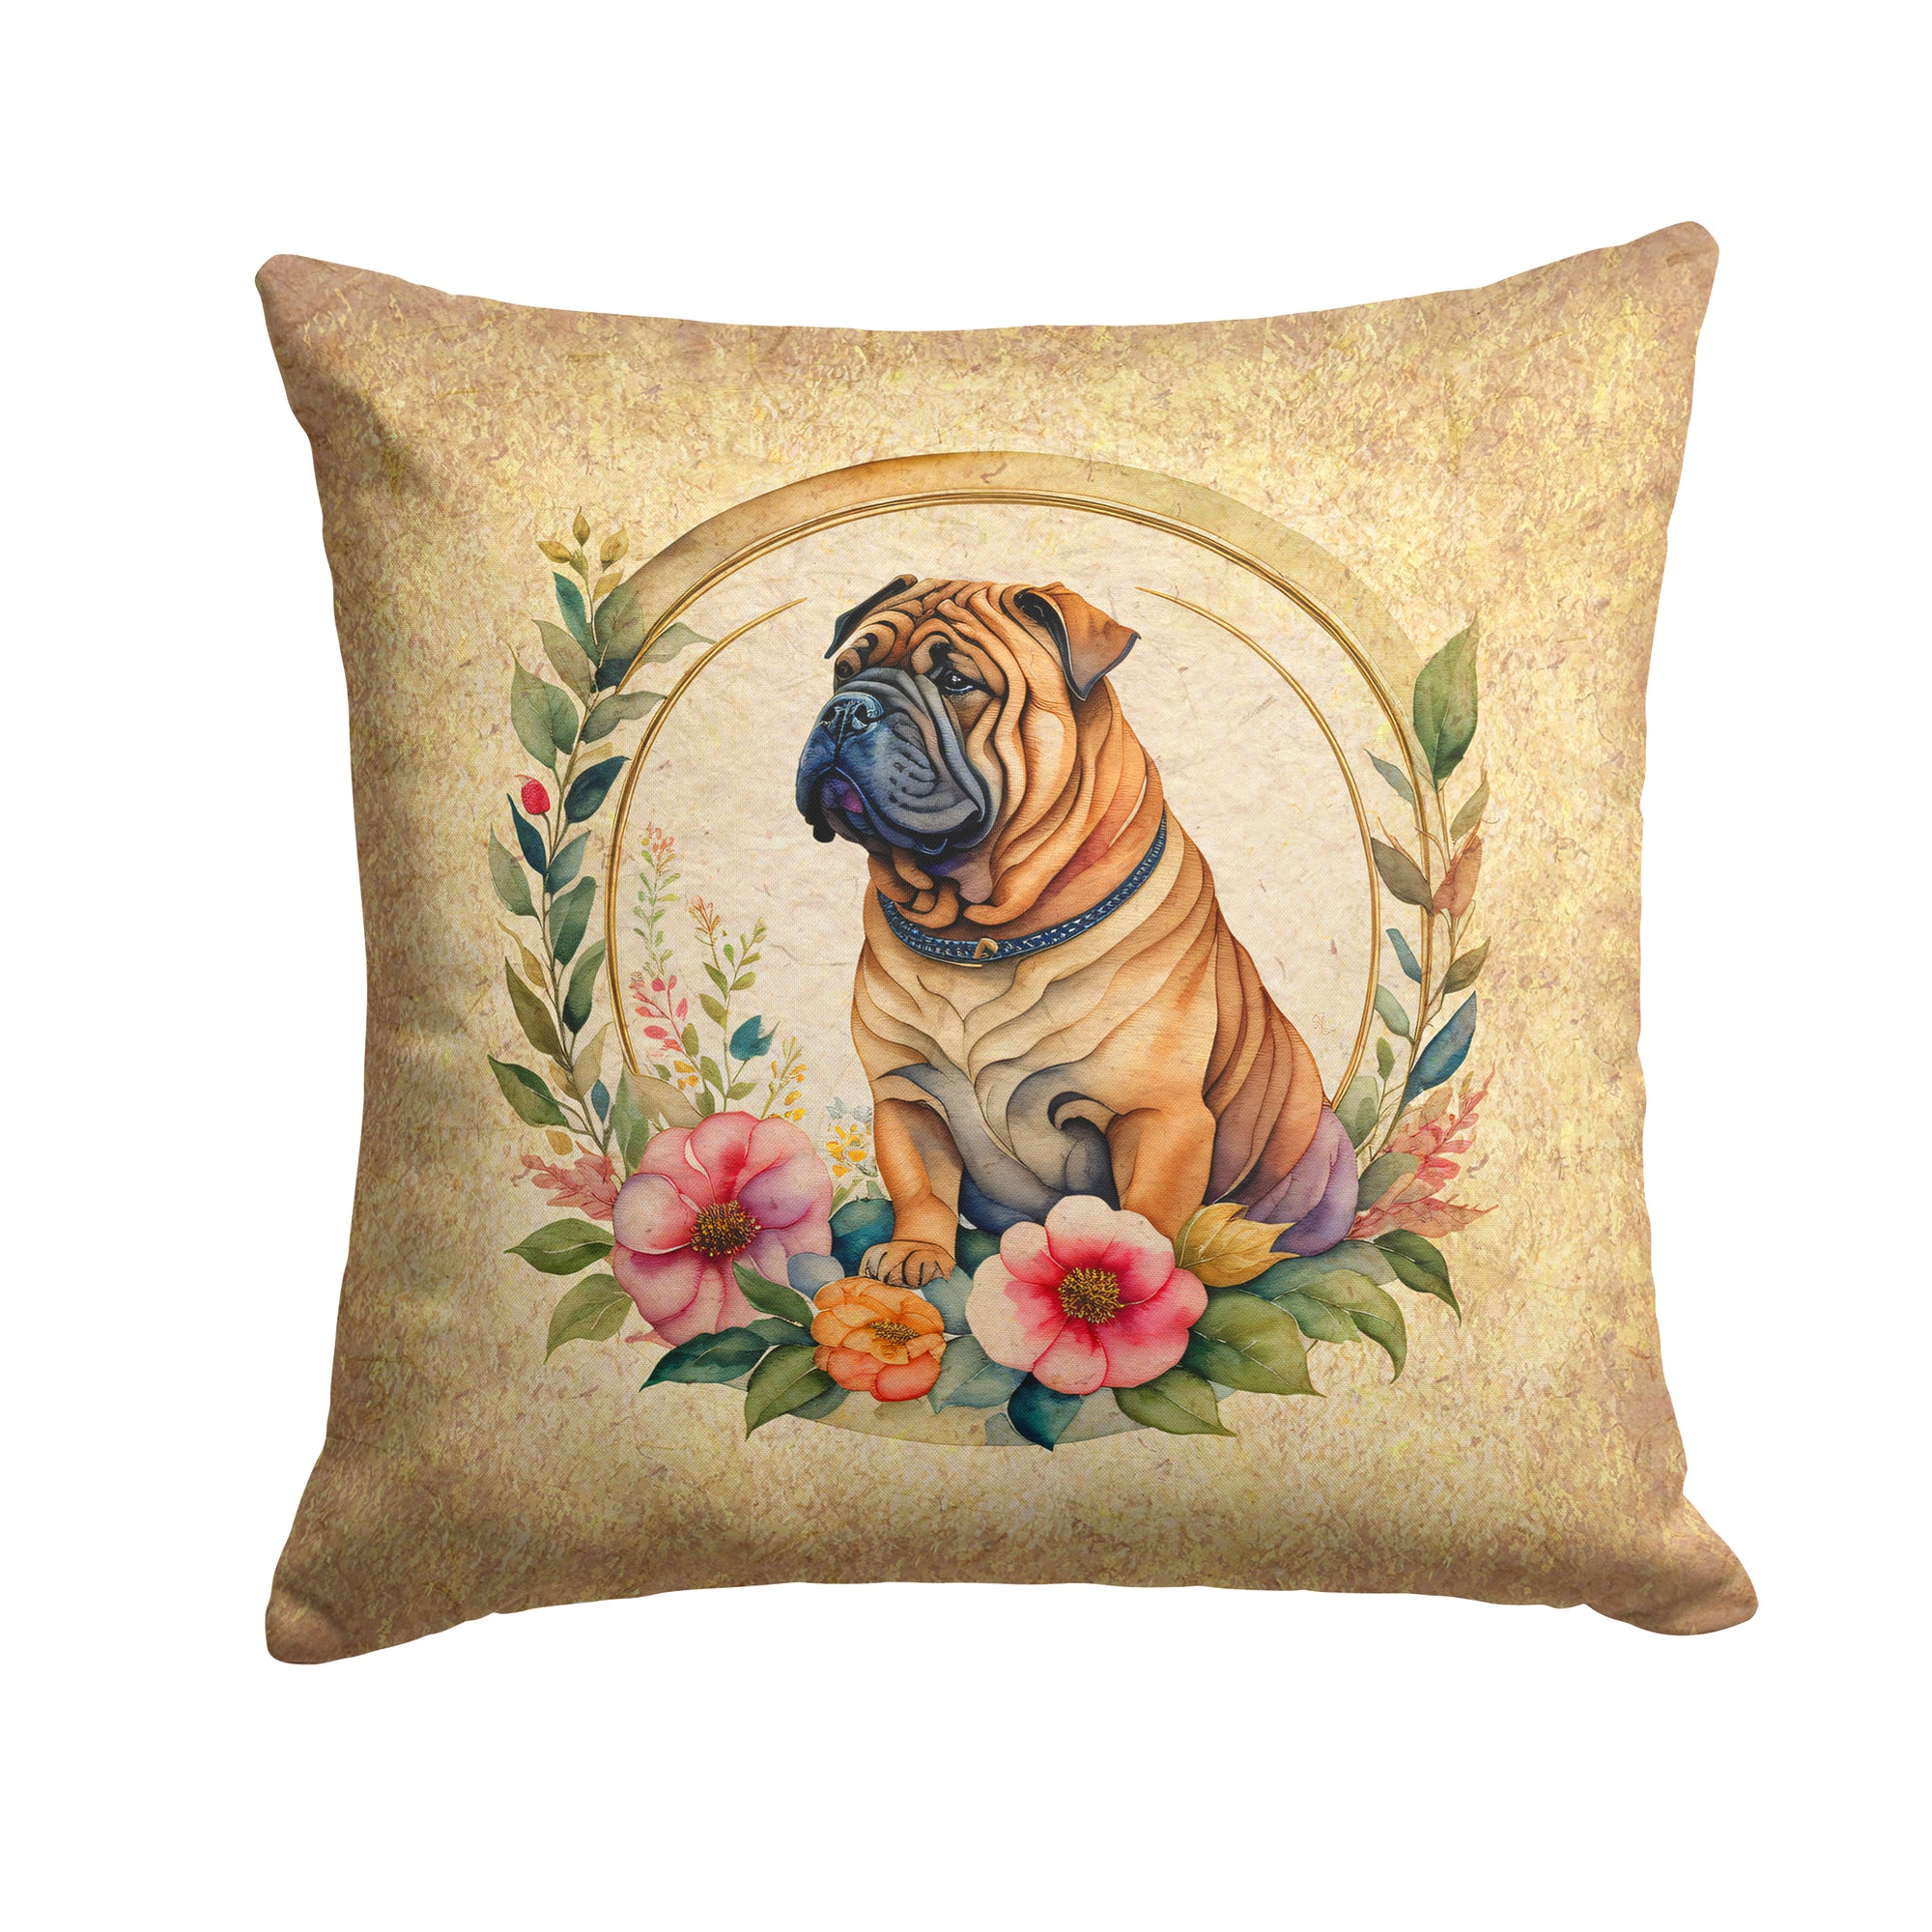 Buy this Shar Pei and Flowers Fabric Decorative Pillow